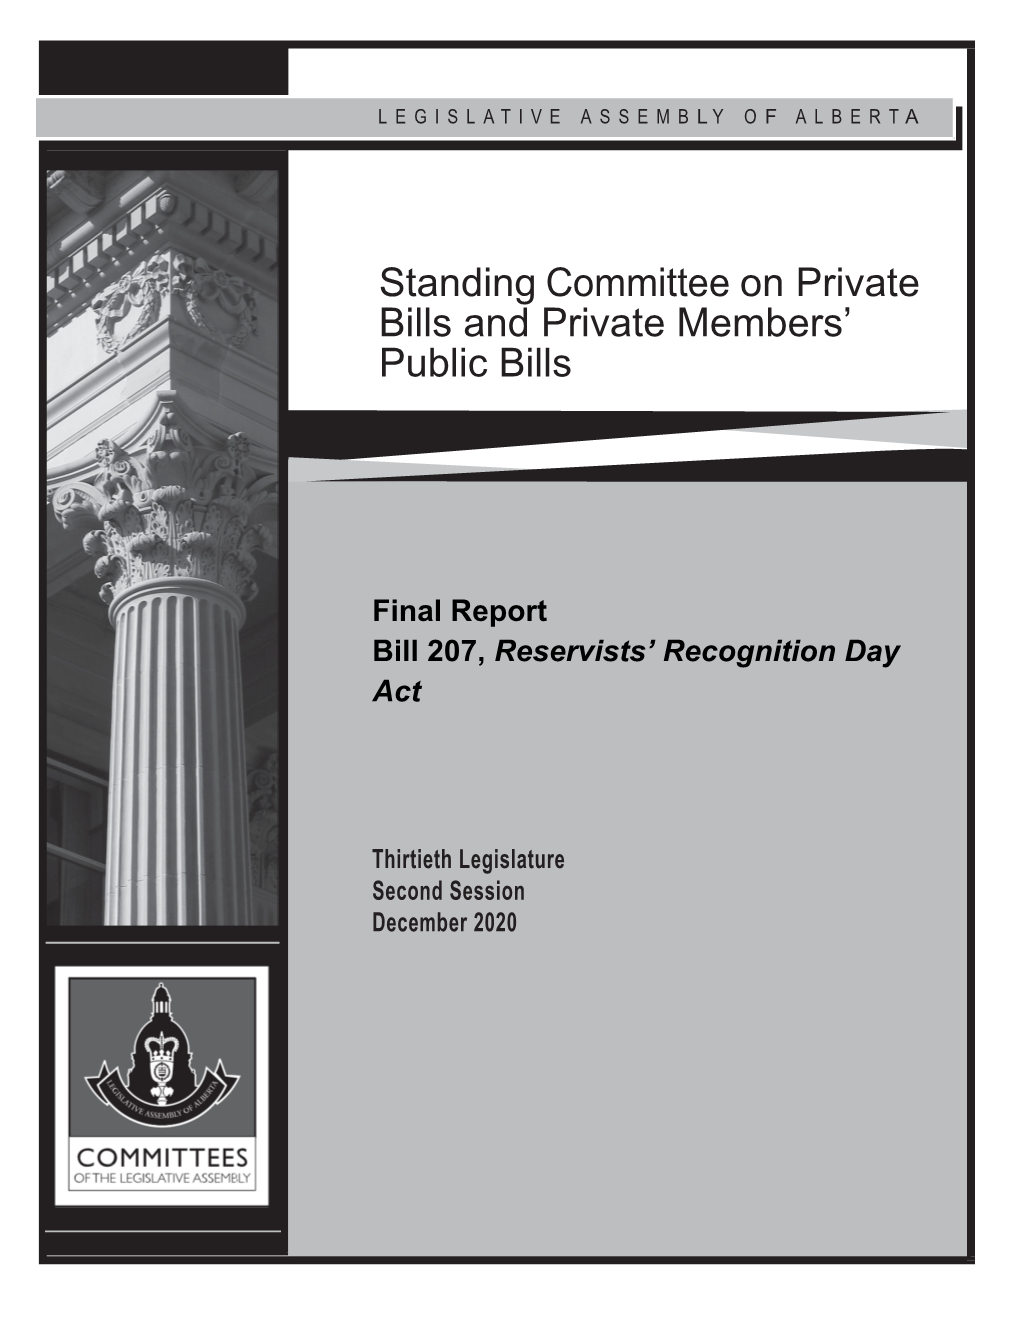 Bill 207, Reservists' Recognition Day